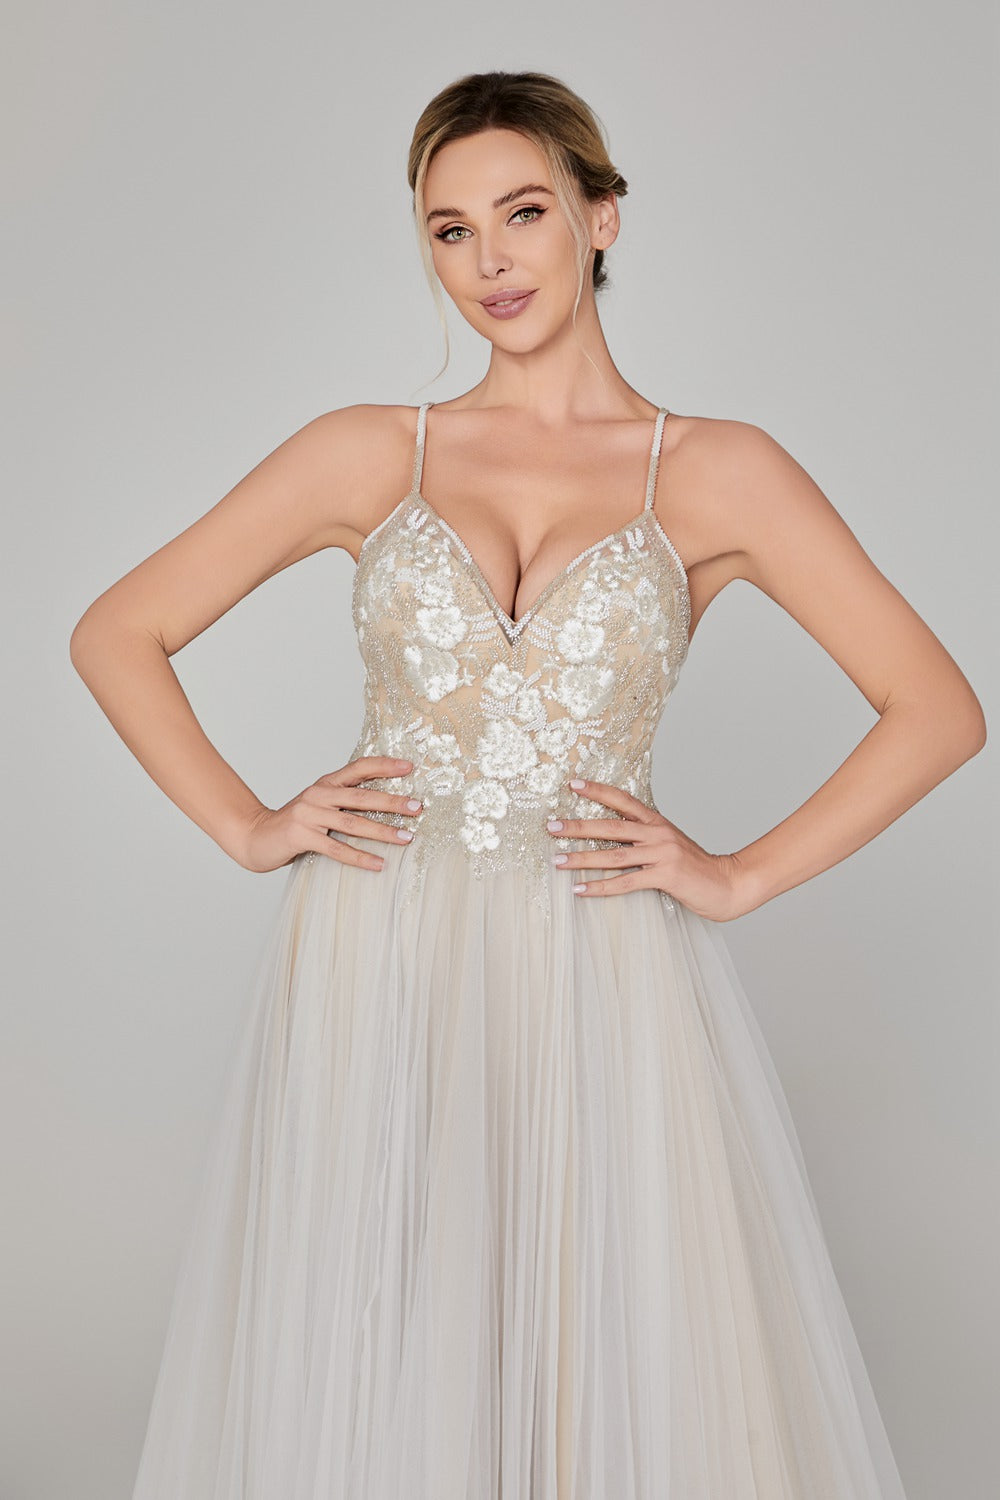 Lace Petal and Tulle Wedding Gown - A Floral Fantasy 32850